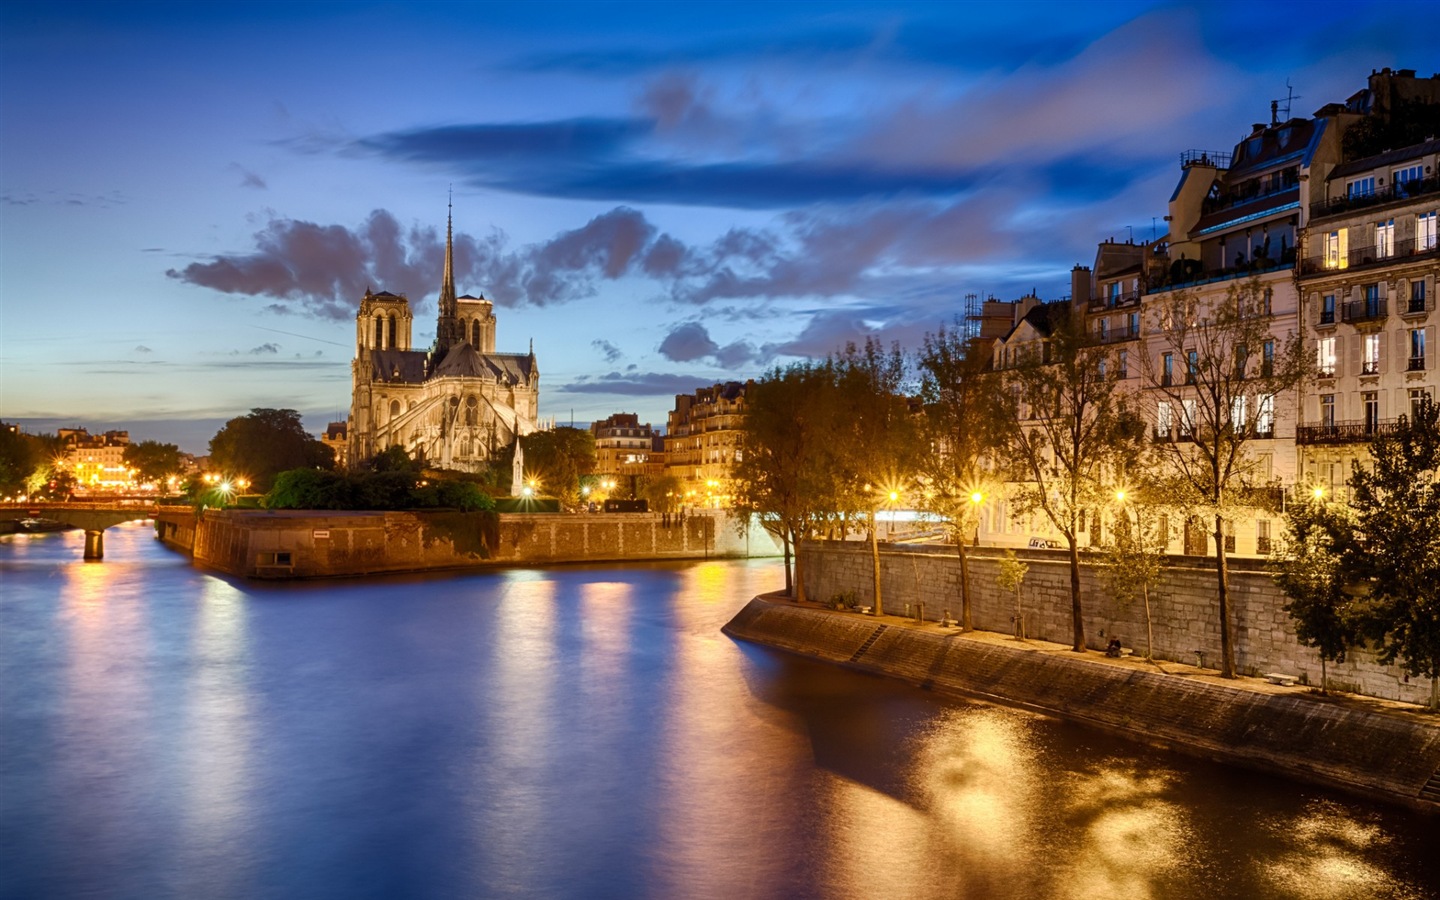 Notre Dame HD Wallpapers #1 - 1440x900